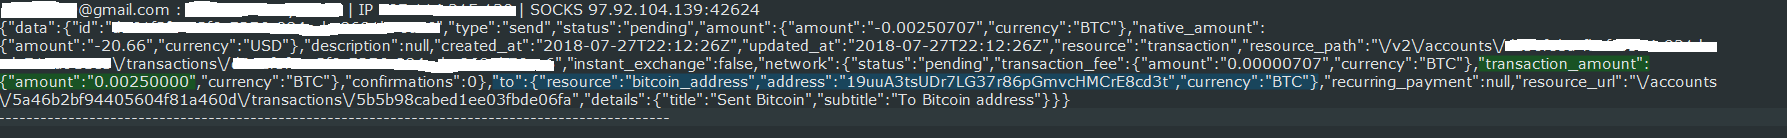 Log of Bitcoin transaction sent to cryptocurrency fraudster's address from a user's account